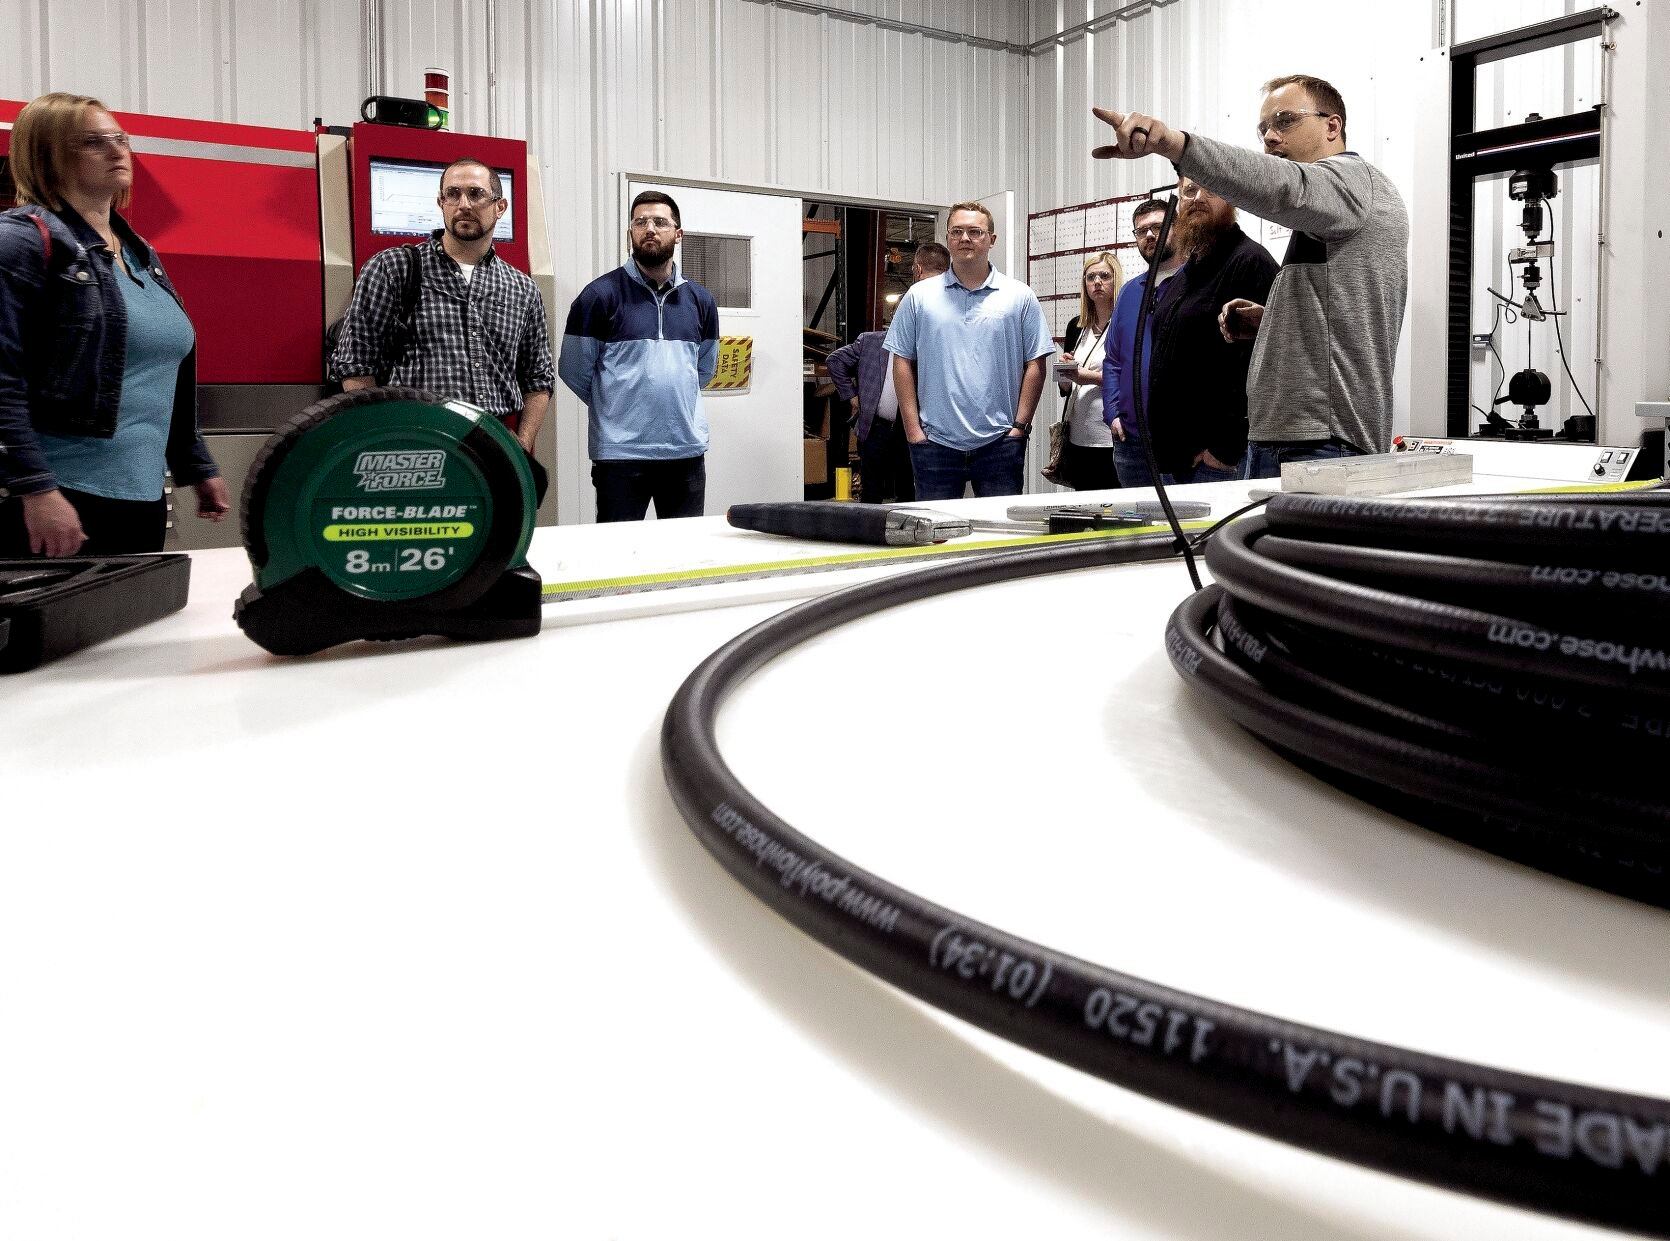 New Product Development Engineer Evan Kuhl (right) speaks with participants in a tour at ProPulse in Peosta, Iowa, as part of Manufacturing Appreciation Week on Tuesday.    PHOTO CREDIT: Stephen Gassman